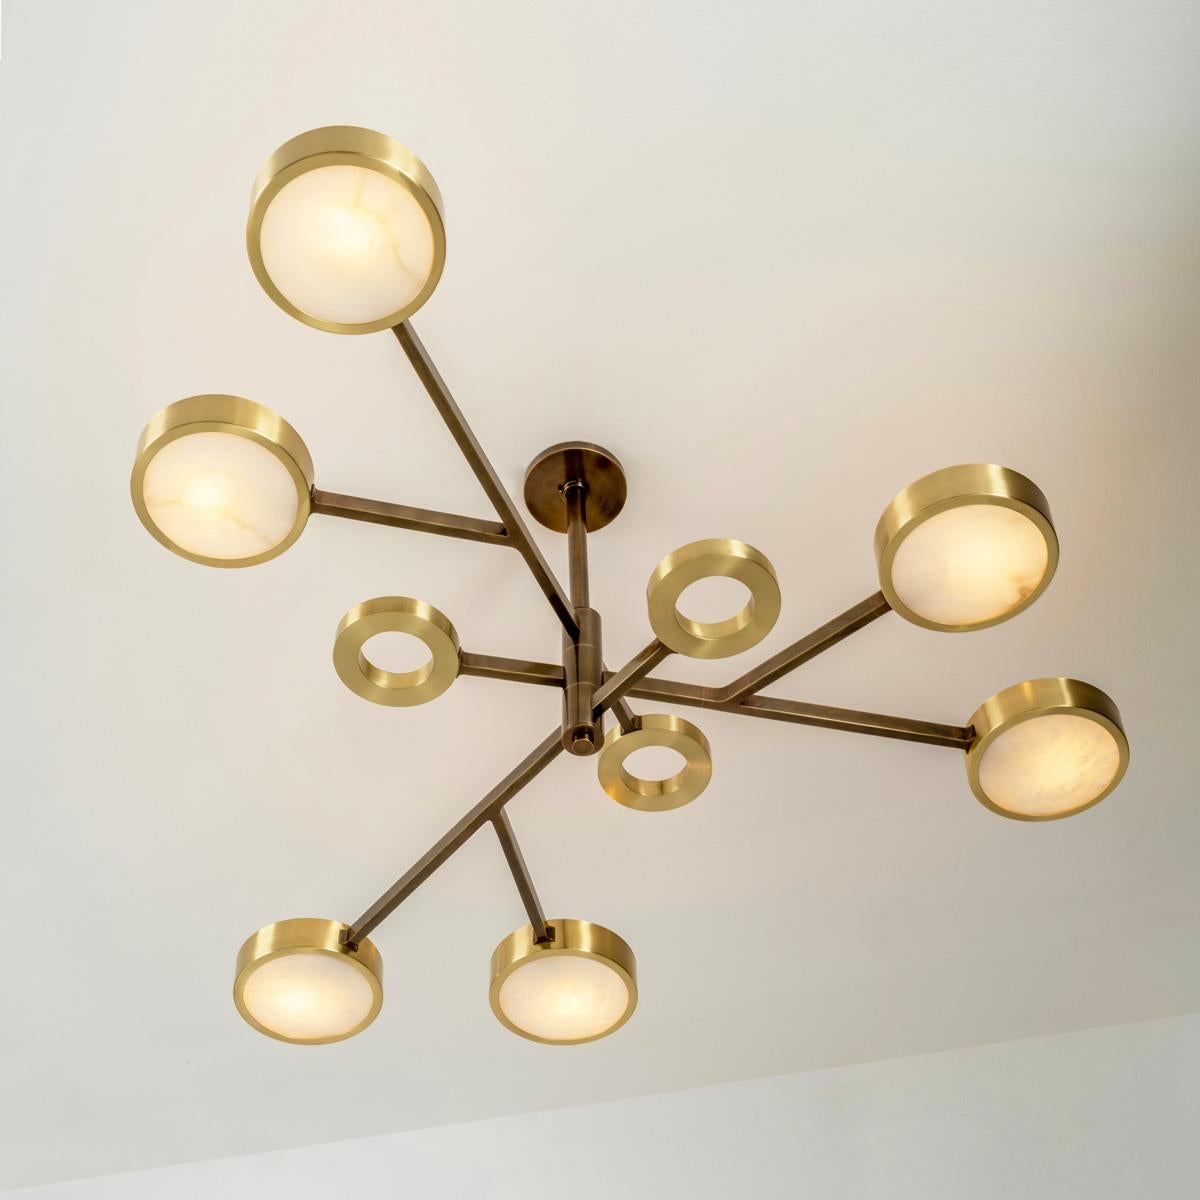 Volterra Ceiling Light by Gaspare Asaro-Satin Nickel and Satin Brass Finish For Sale 4